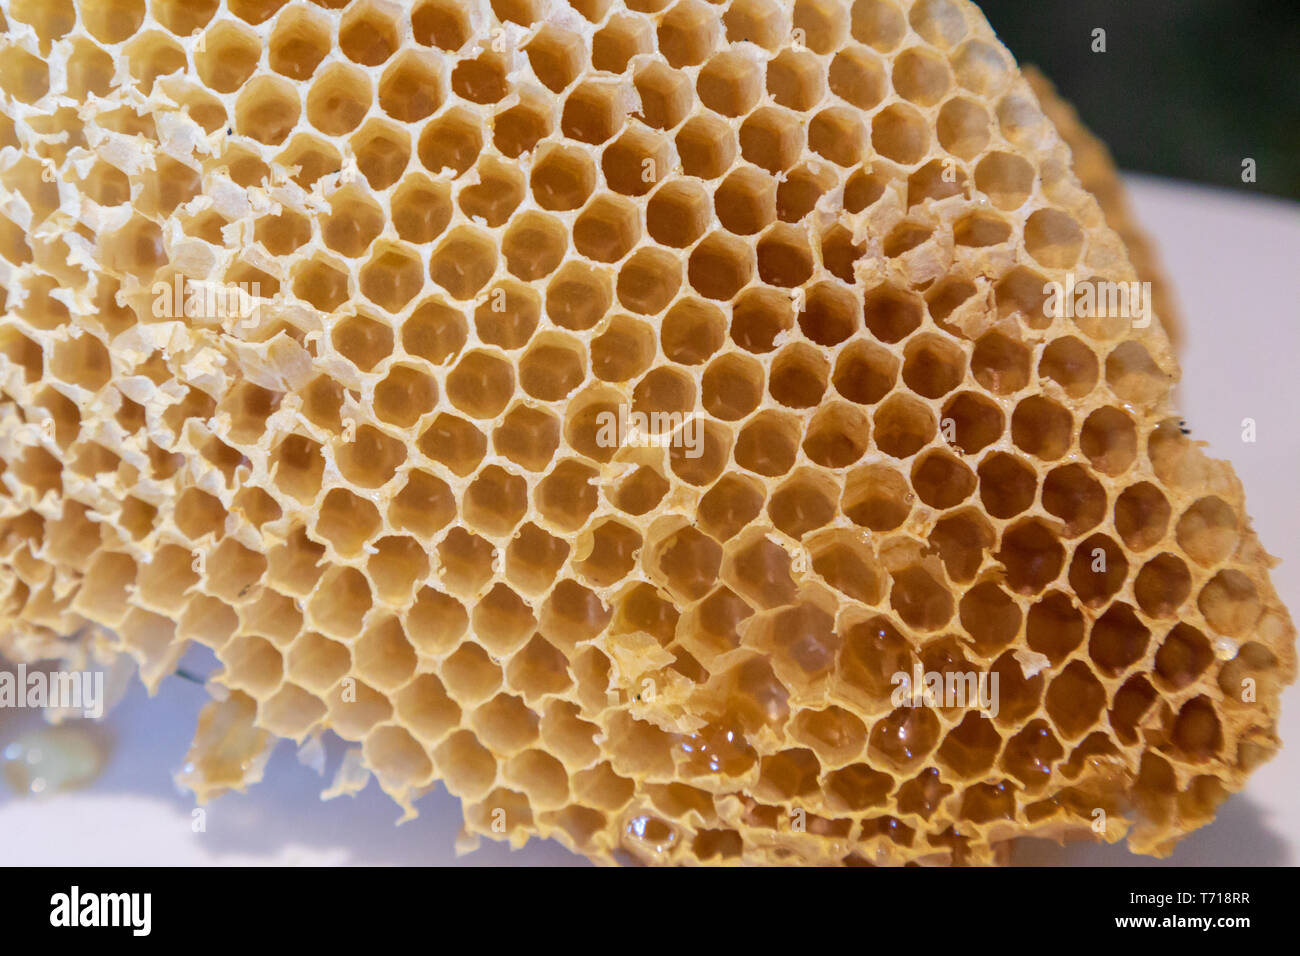 Honeycomb containing nectar and bees eggs Stock Photo